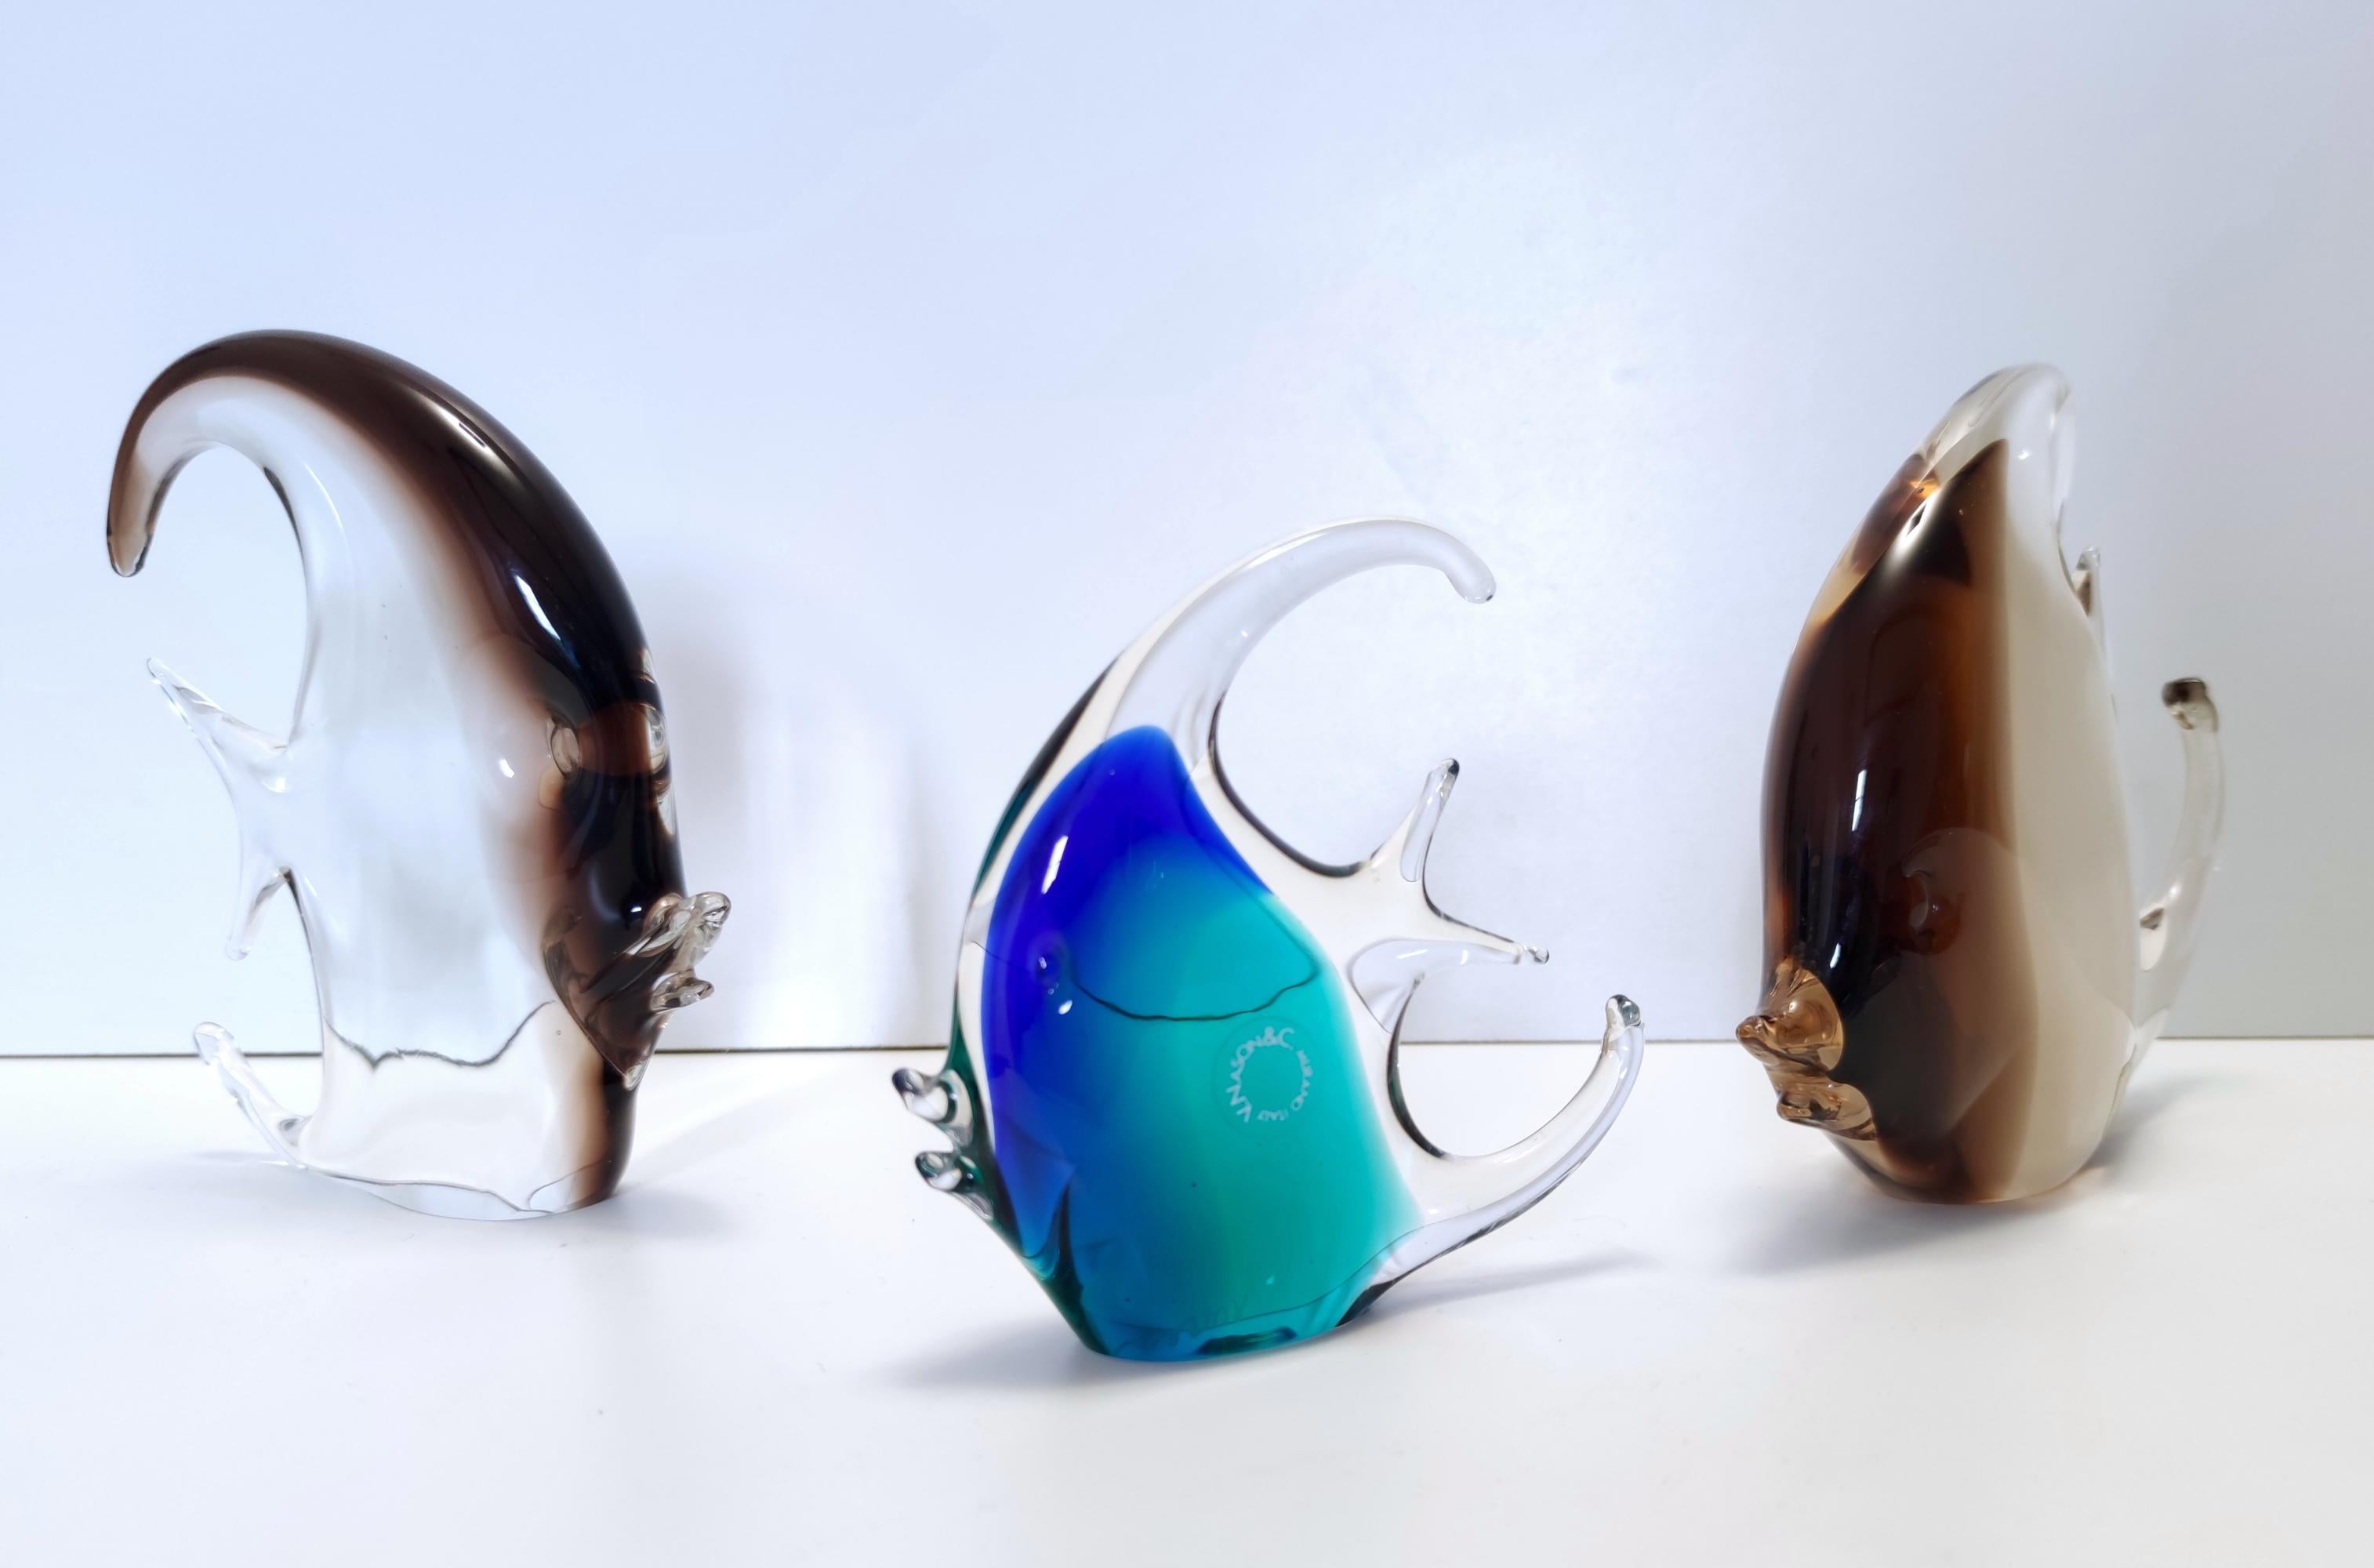 Vincenzo Nason & C. Murano, Italy, 1980s. 
This fish is made in Murano glass.
It is a vintage piece, therefore it might show slight traces of use, but it can be considered as in excellent original condition and ready to become a piece in a home.
It